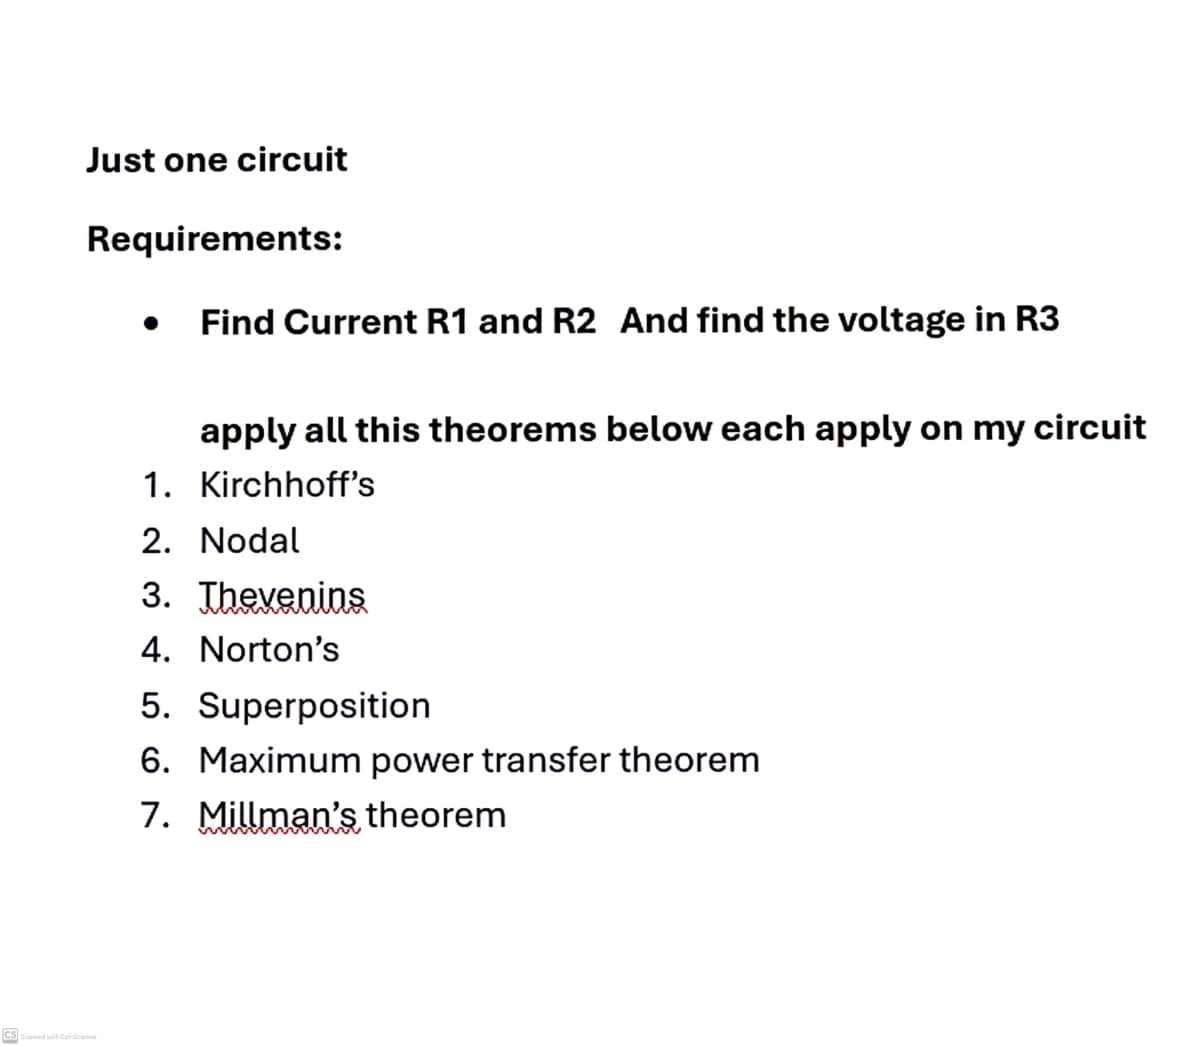 Just one circuit
Requirements:
• Find Current R1 and R2 And find the voltage in R3
apply all this theorems below each apply on my circuit
1. Kirchhoff's
2. Nodal
3. Thevenins
4. Norton's
5. Superposition
6. Maximum power transfer theorem
7. Millman's theorem